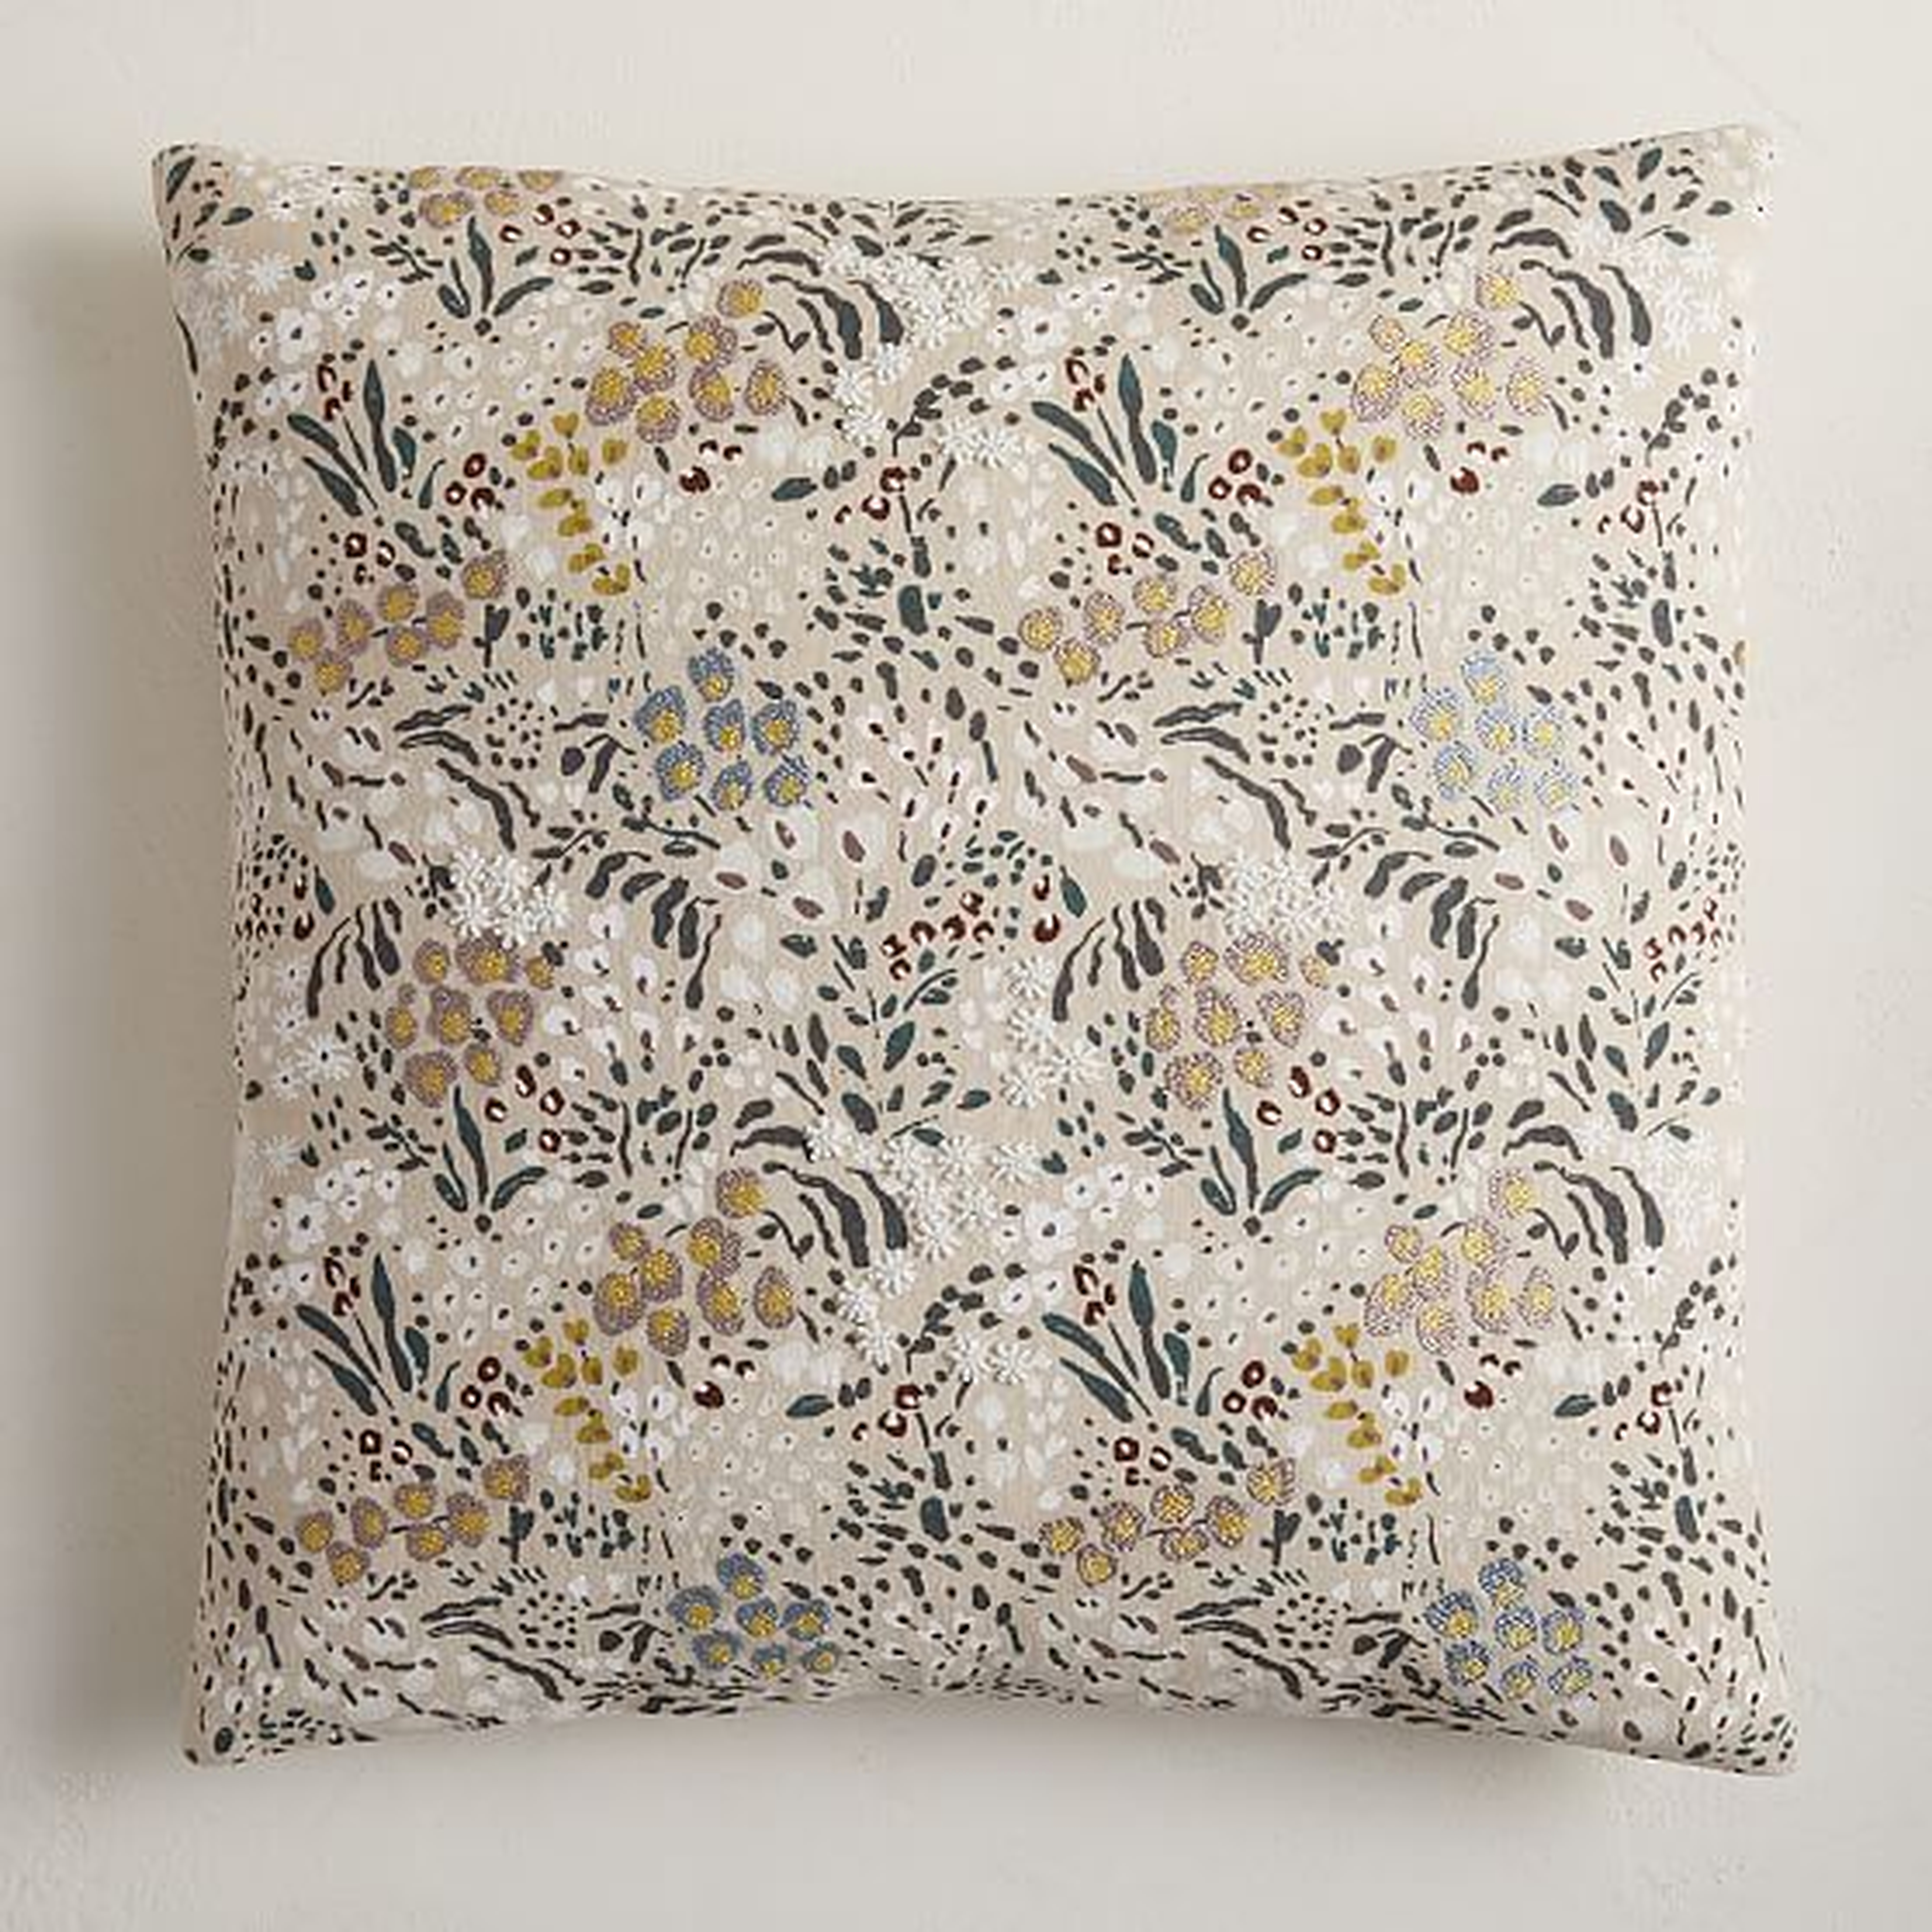 Embellished Blooms Pillow Cover, 18"x18", Natural Flax, Set of 2 - West Elm